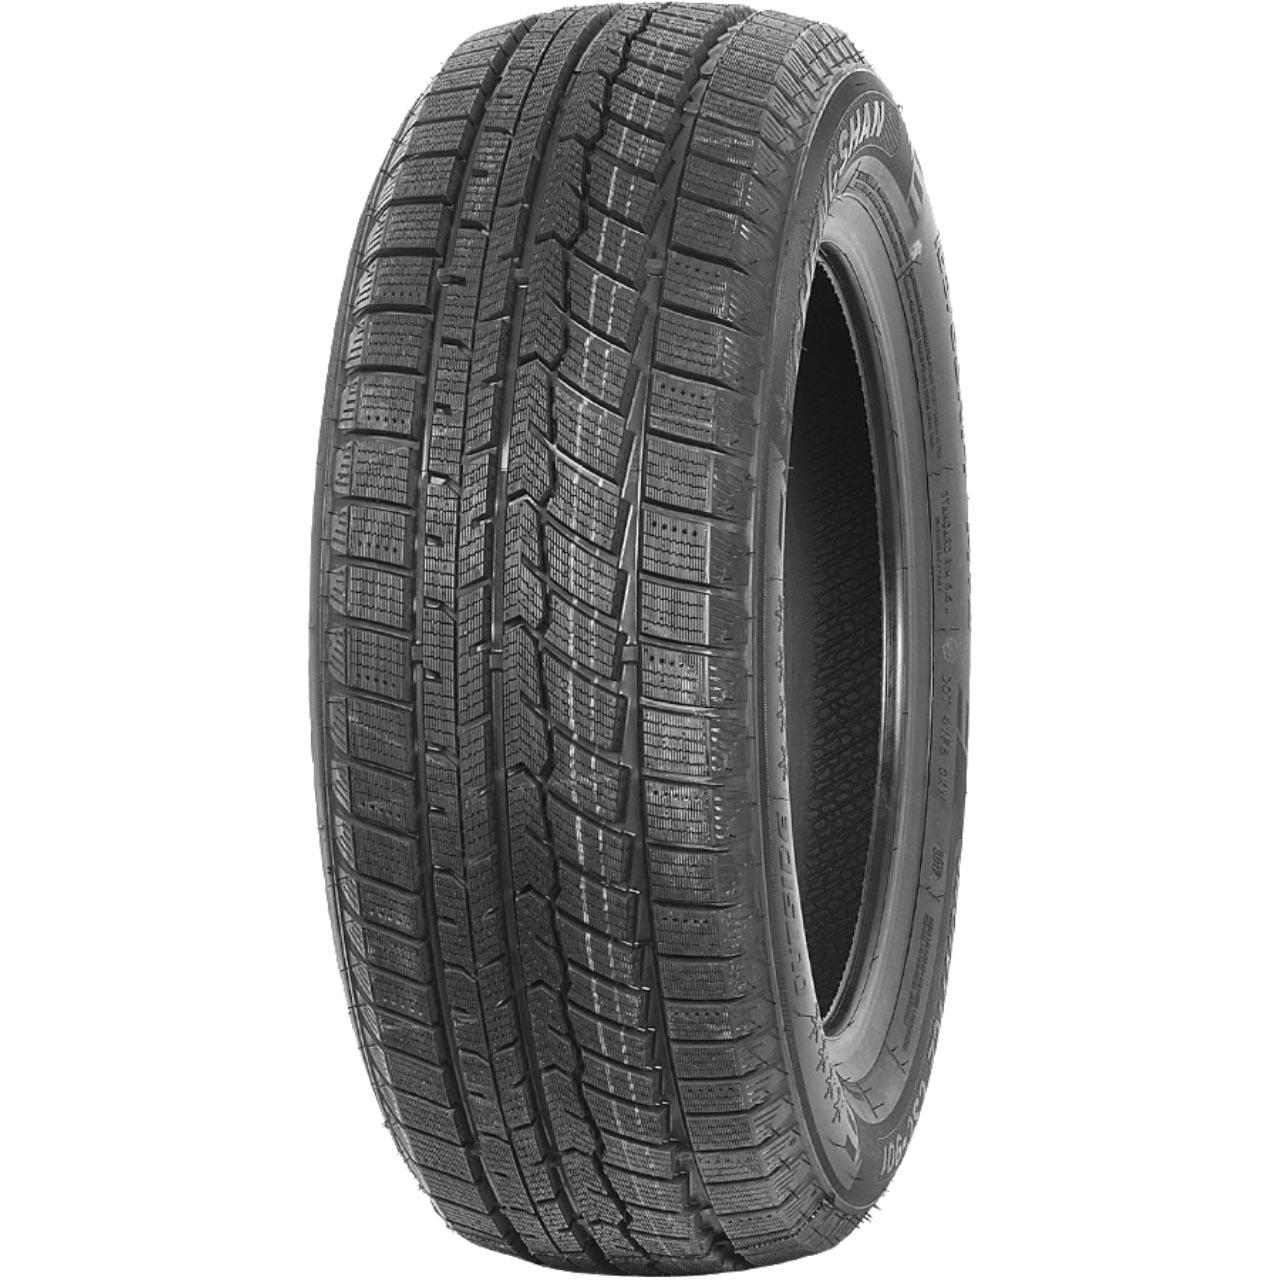 CHENGSHAN MONTICE CSC-901 185/55R15 86H BSW